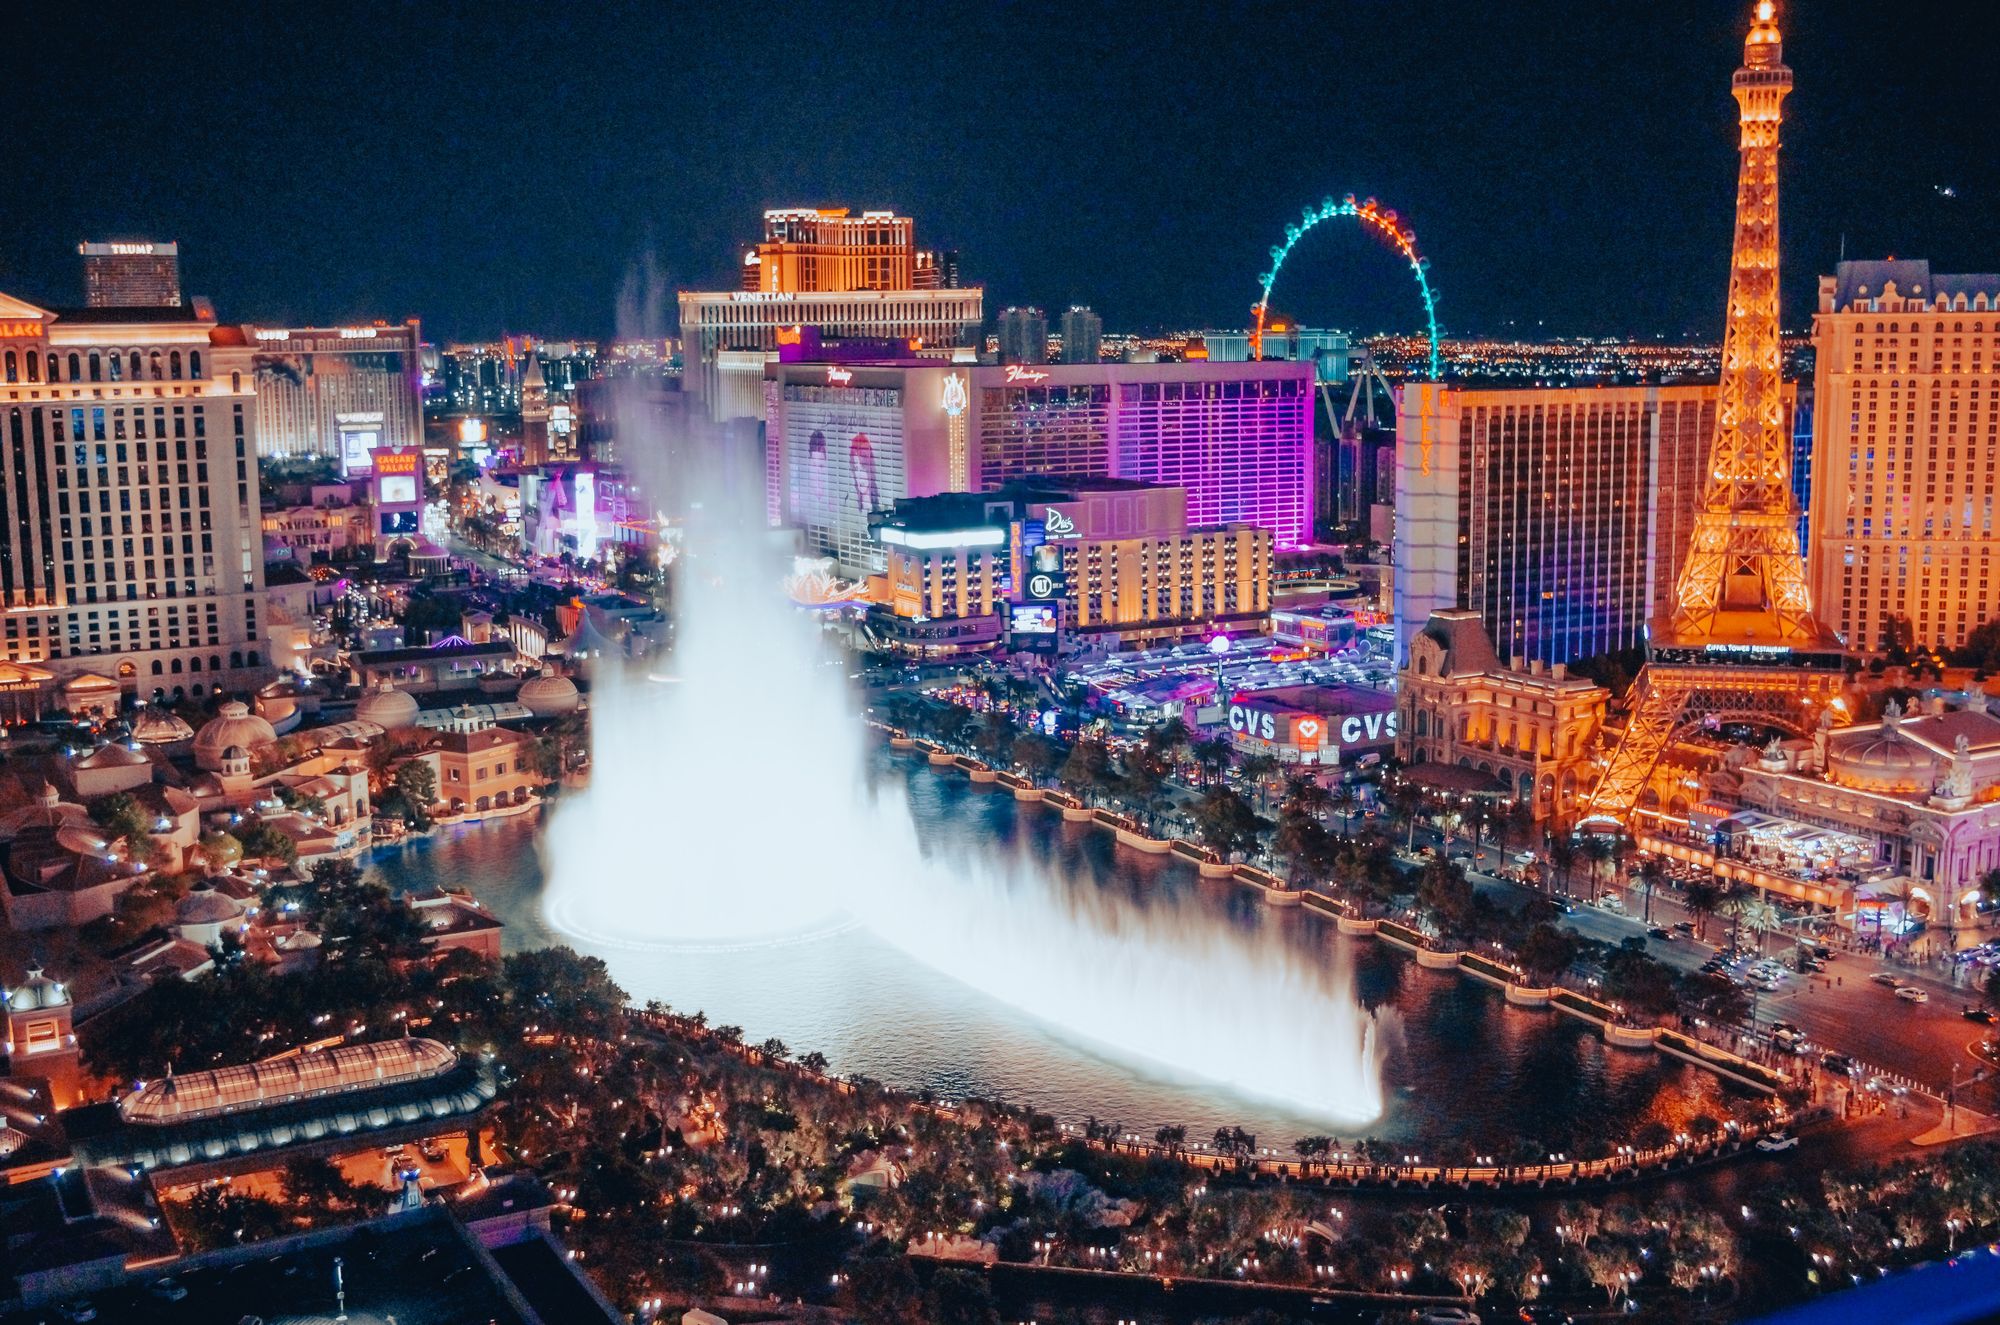 The Bellagio fountain is a free show with dancing fountains, music, and lights.